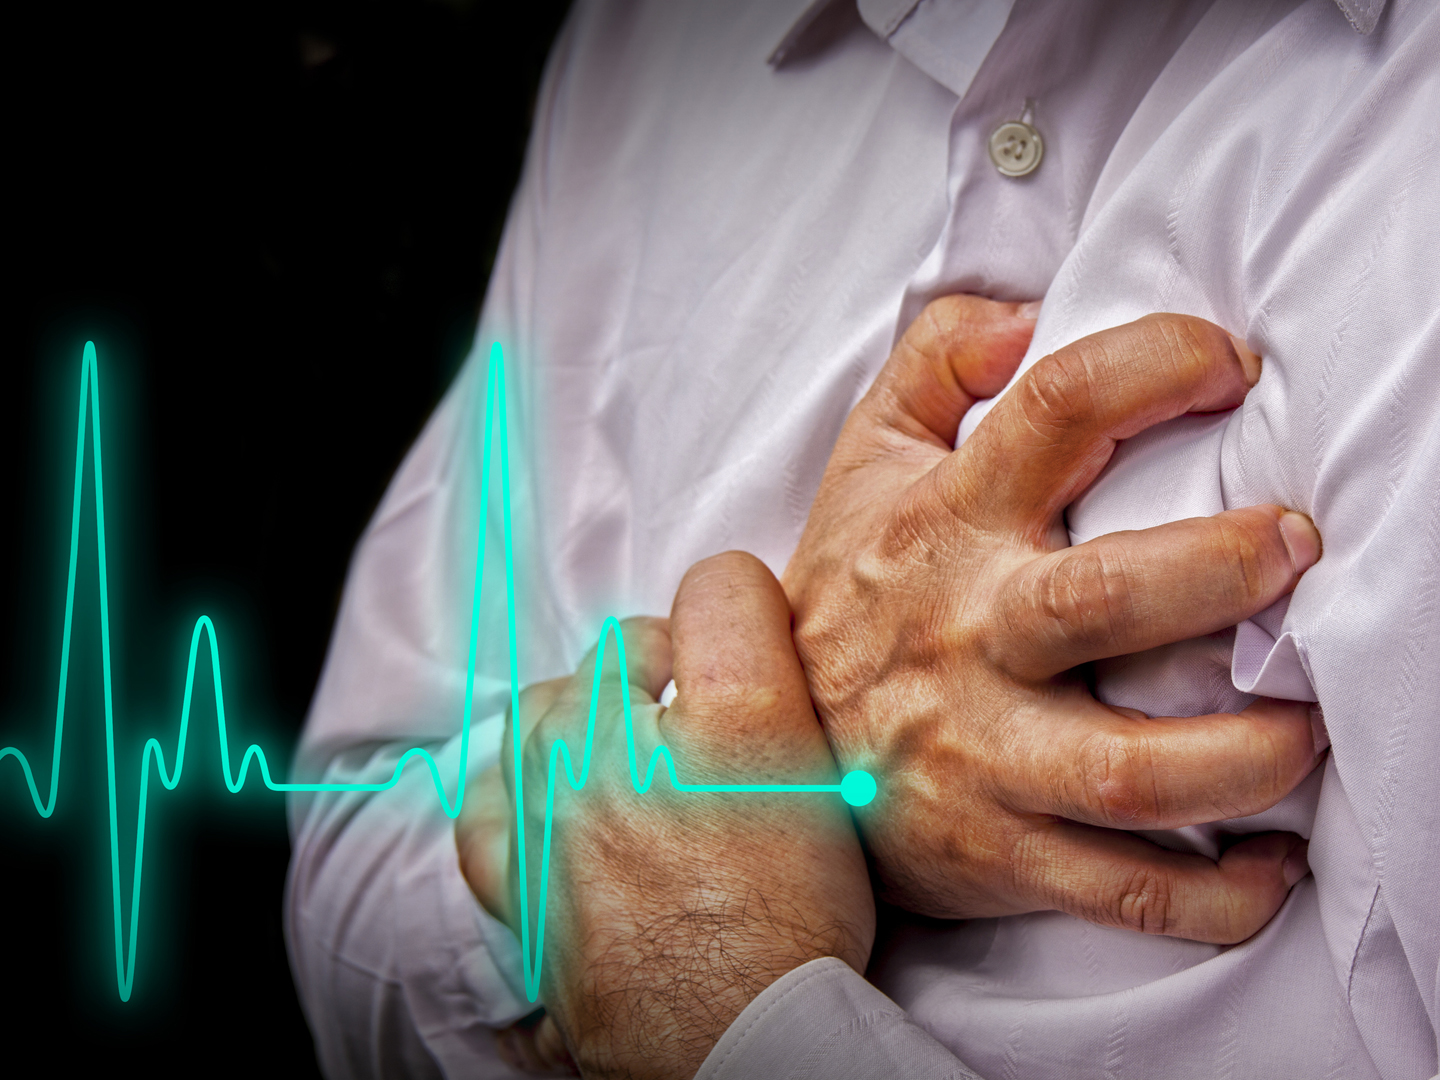 Heart Attack - Men with chest pain